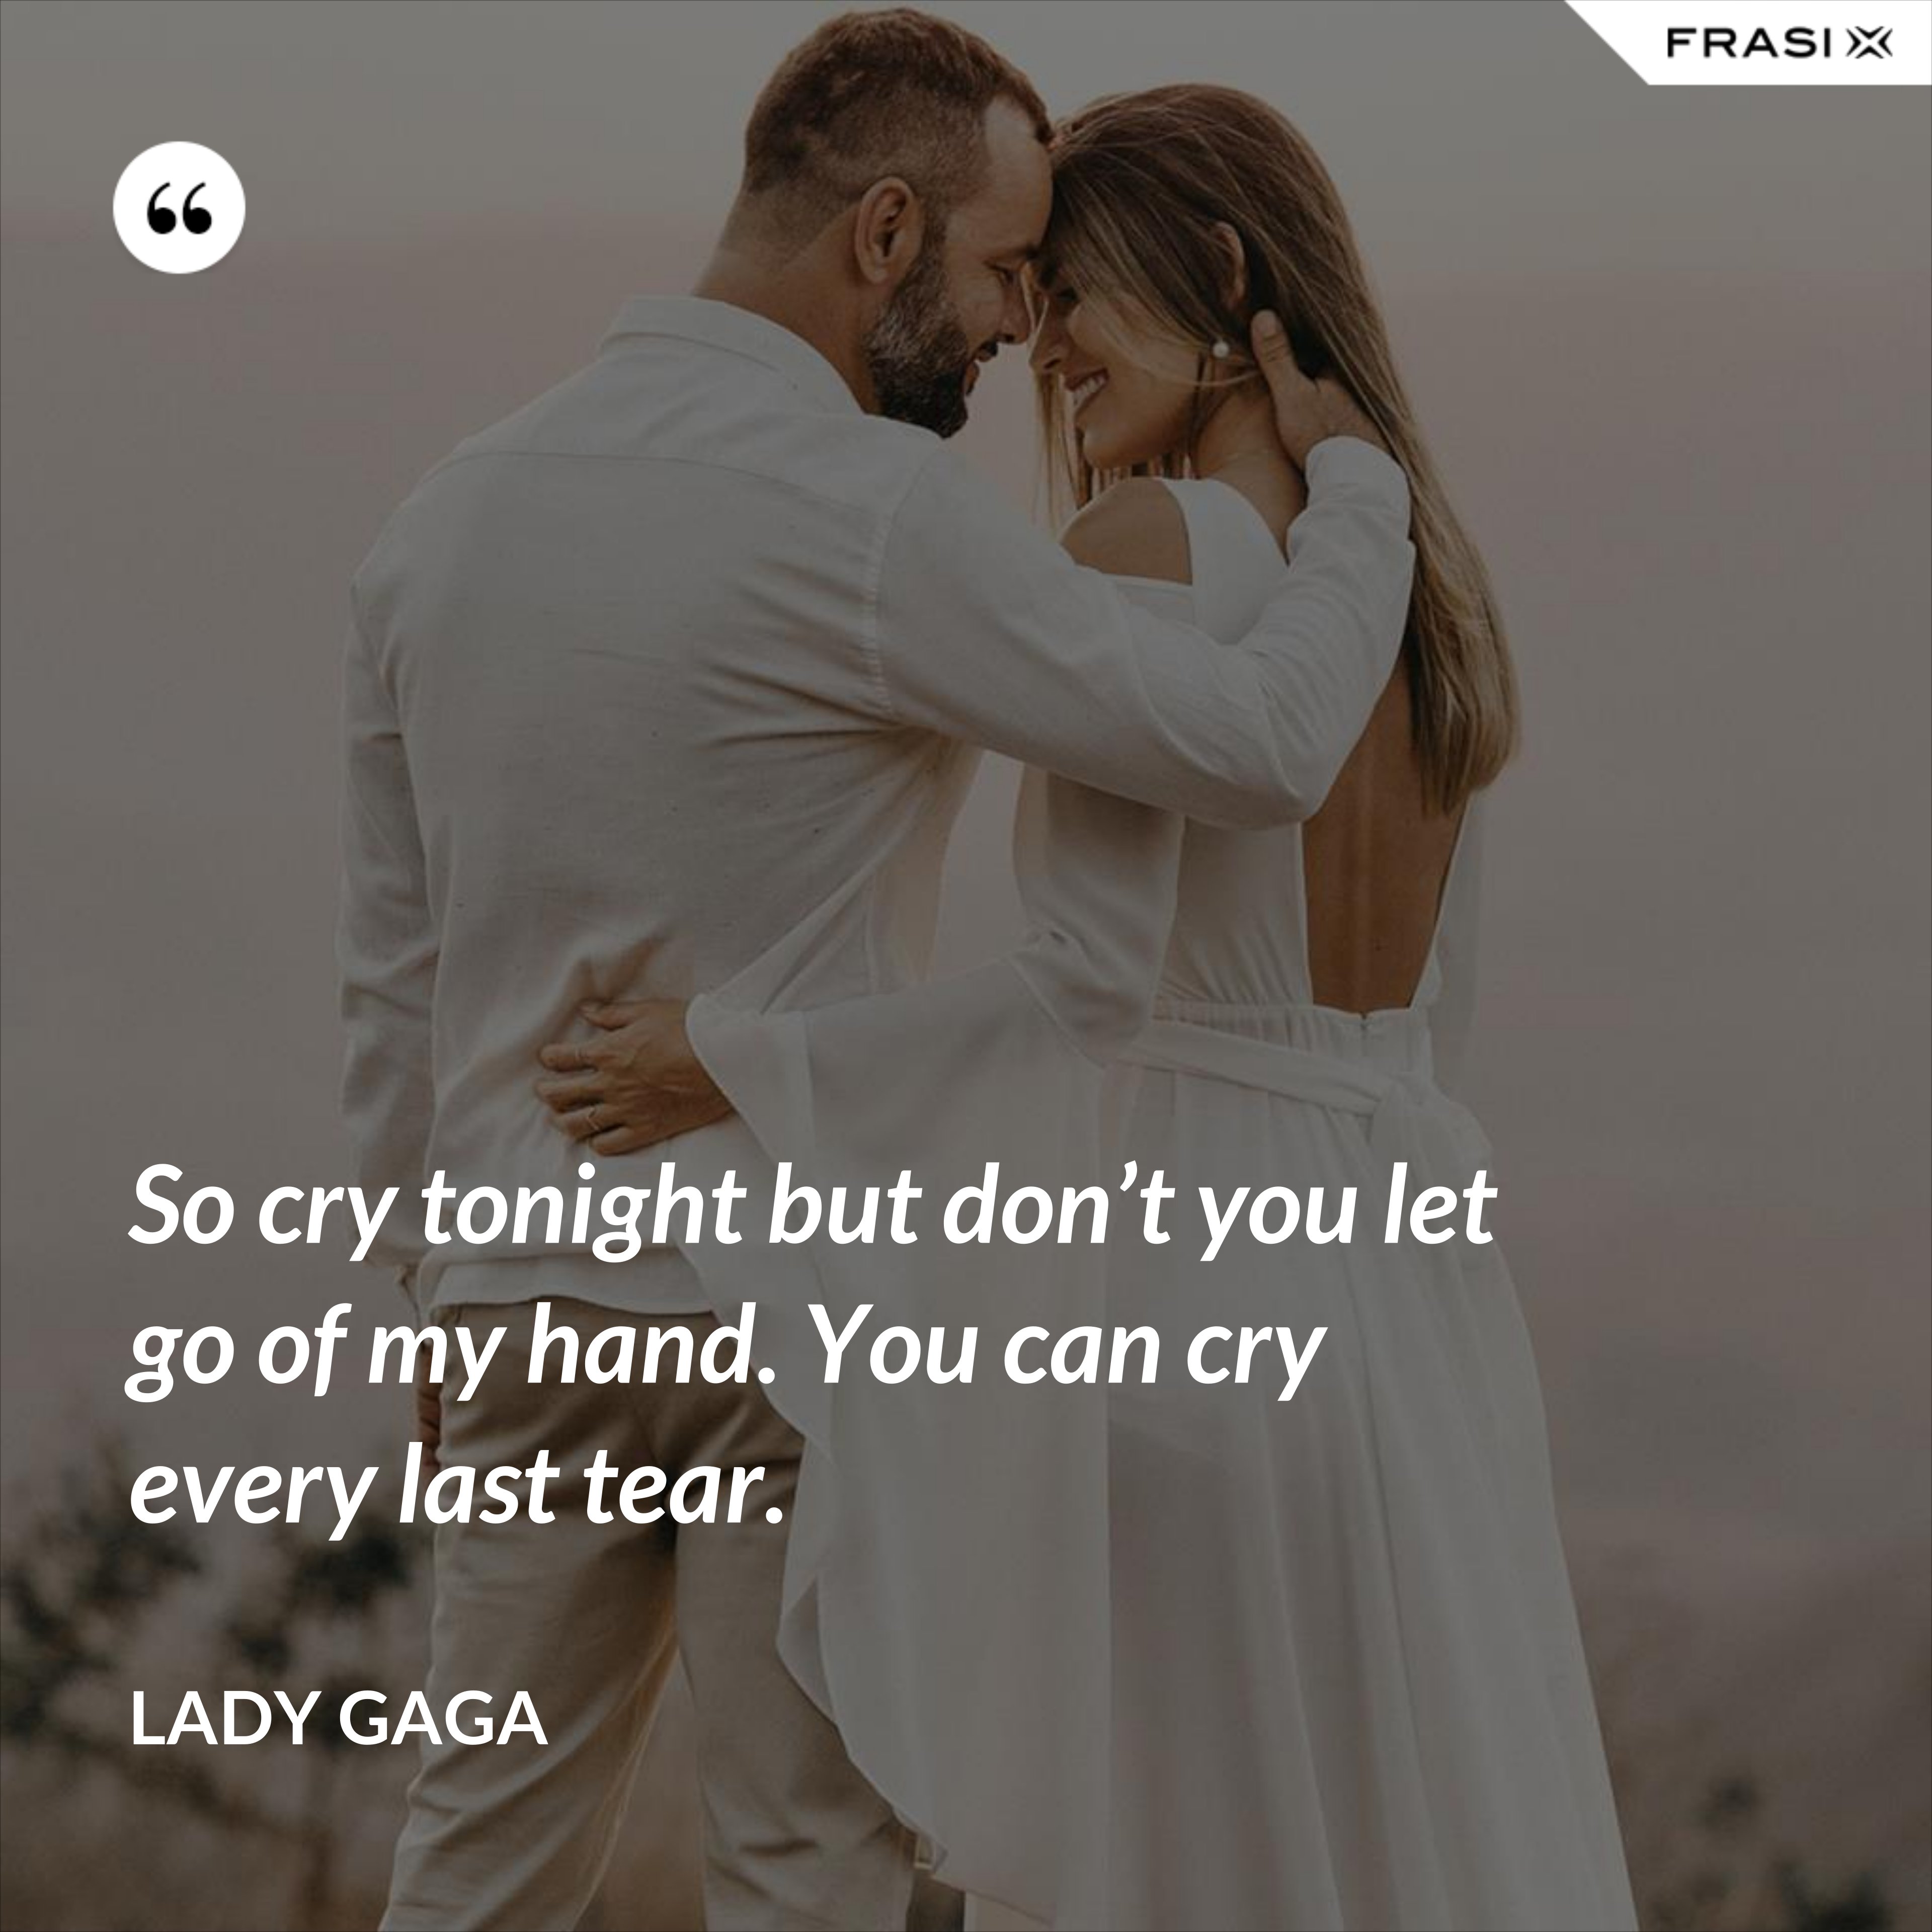 So cry tonight but don’t you let go of my hand. You can cry every last tear. - Lady Gaga